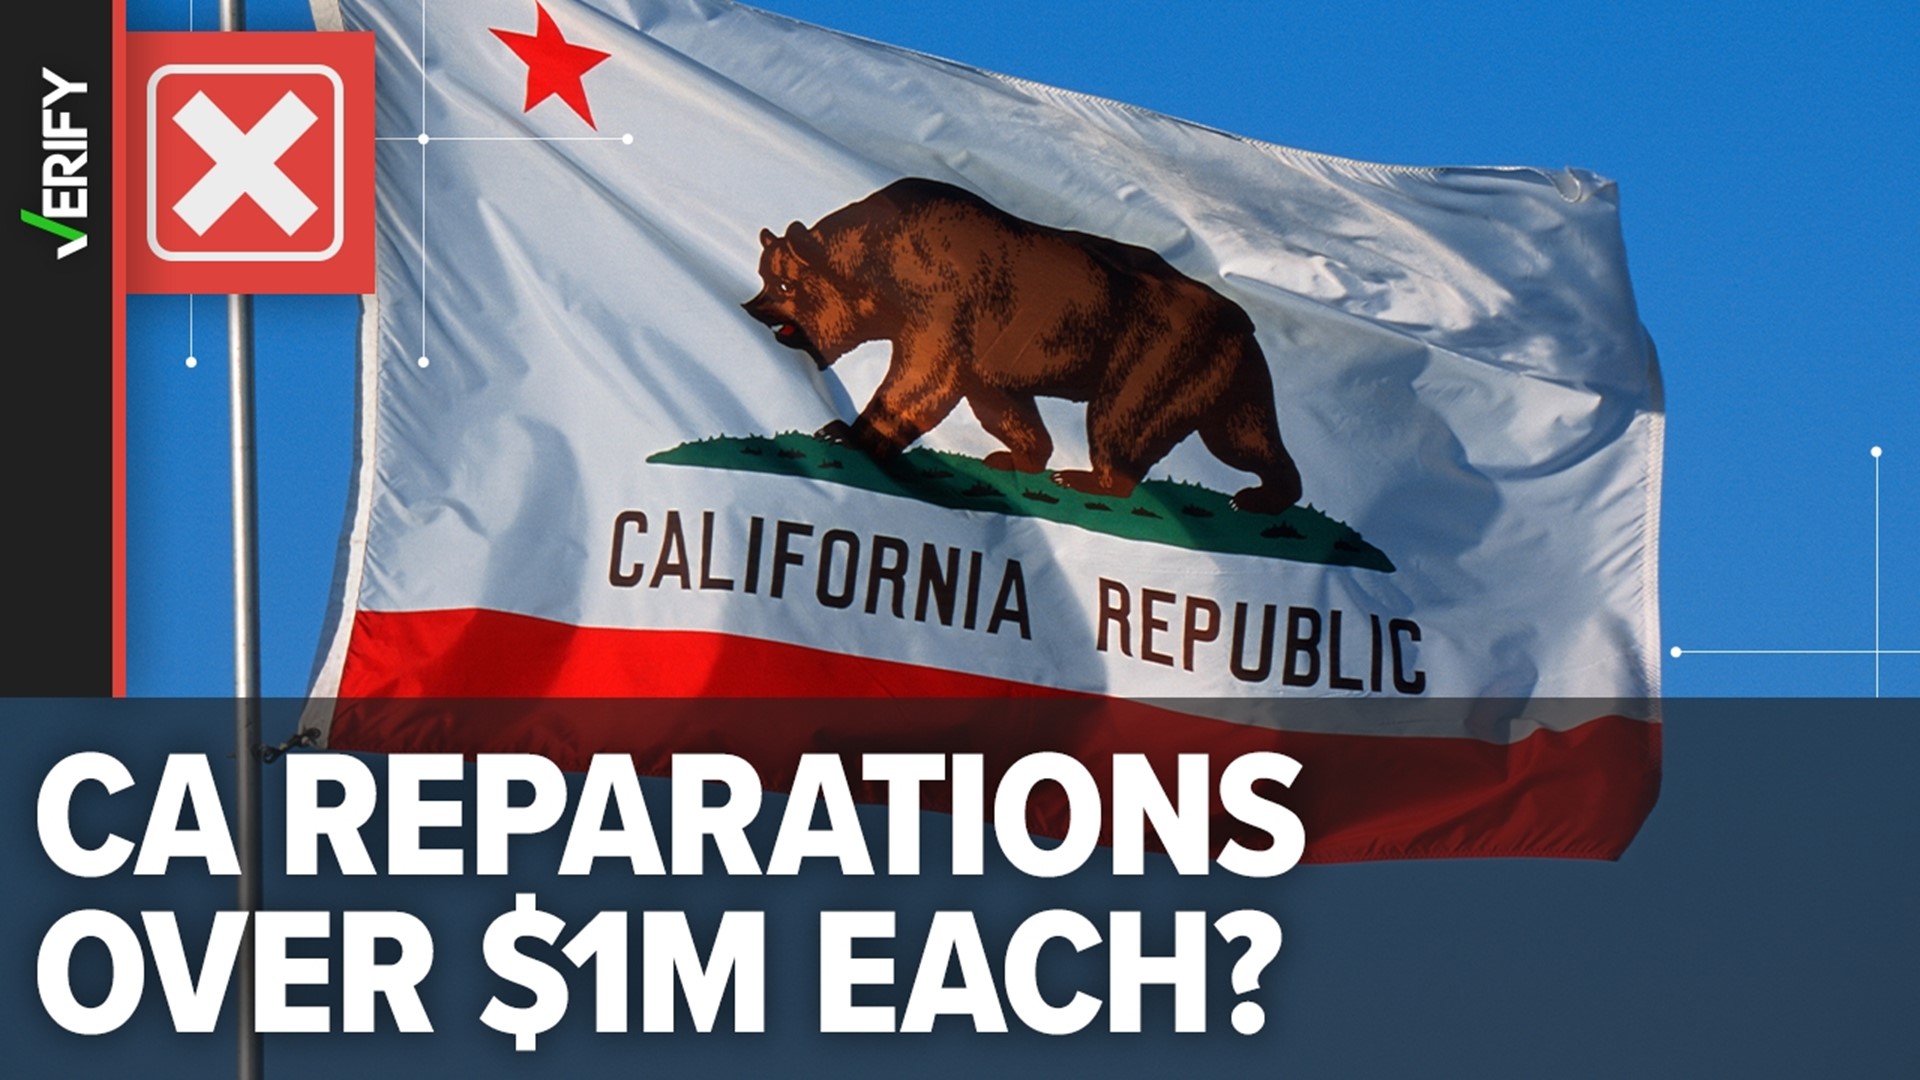 Reparations payments for California’s Black residents would still need to pass the state legislature and be signed into law by Governor Gavin Newsom.